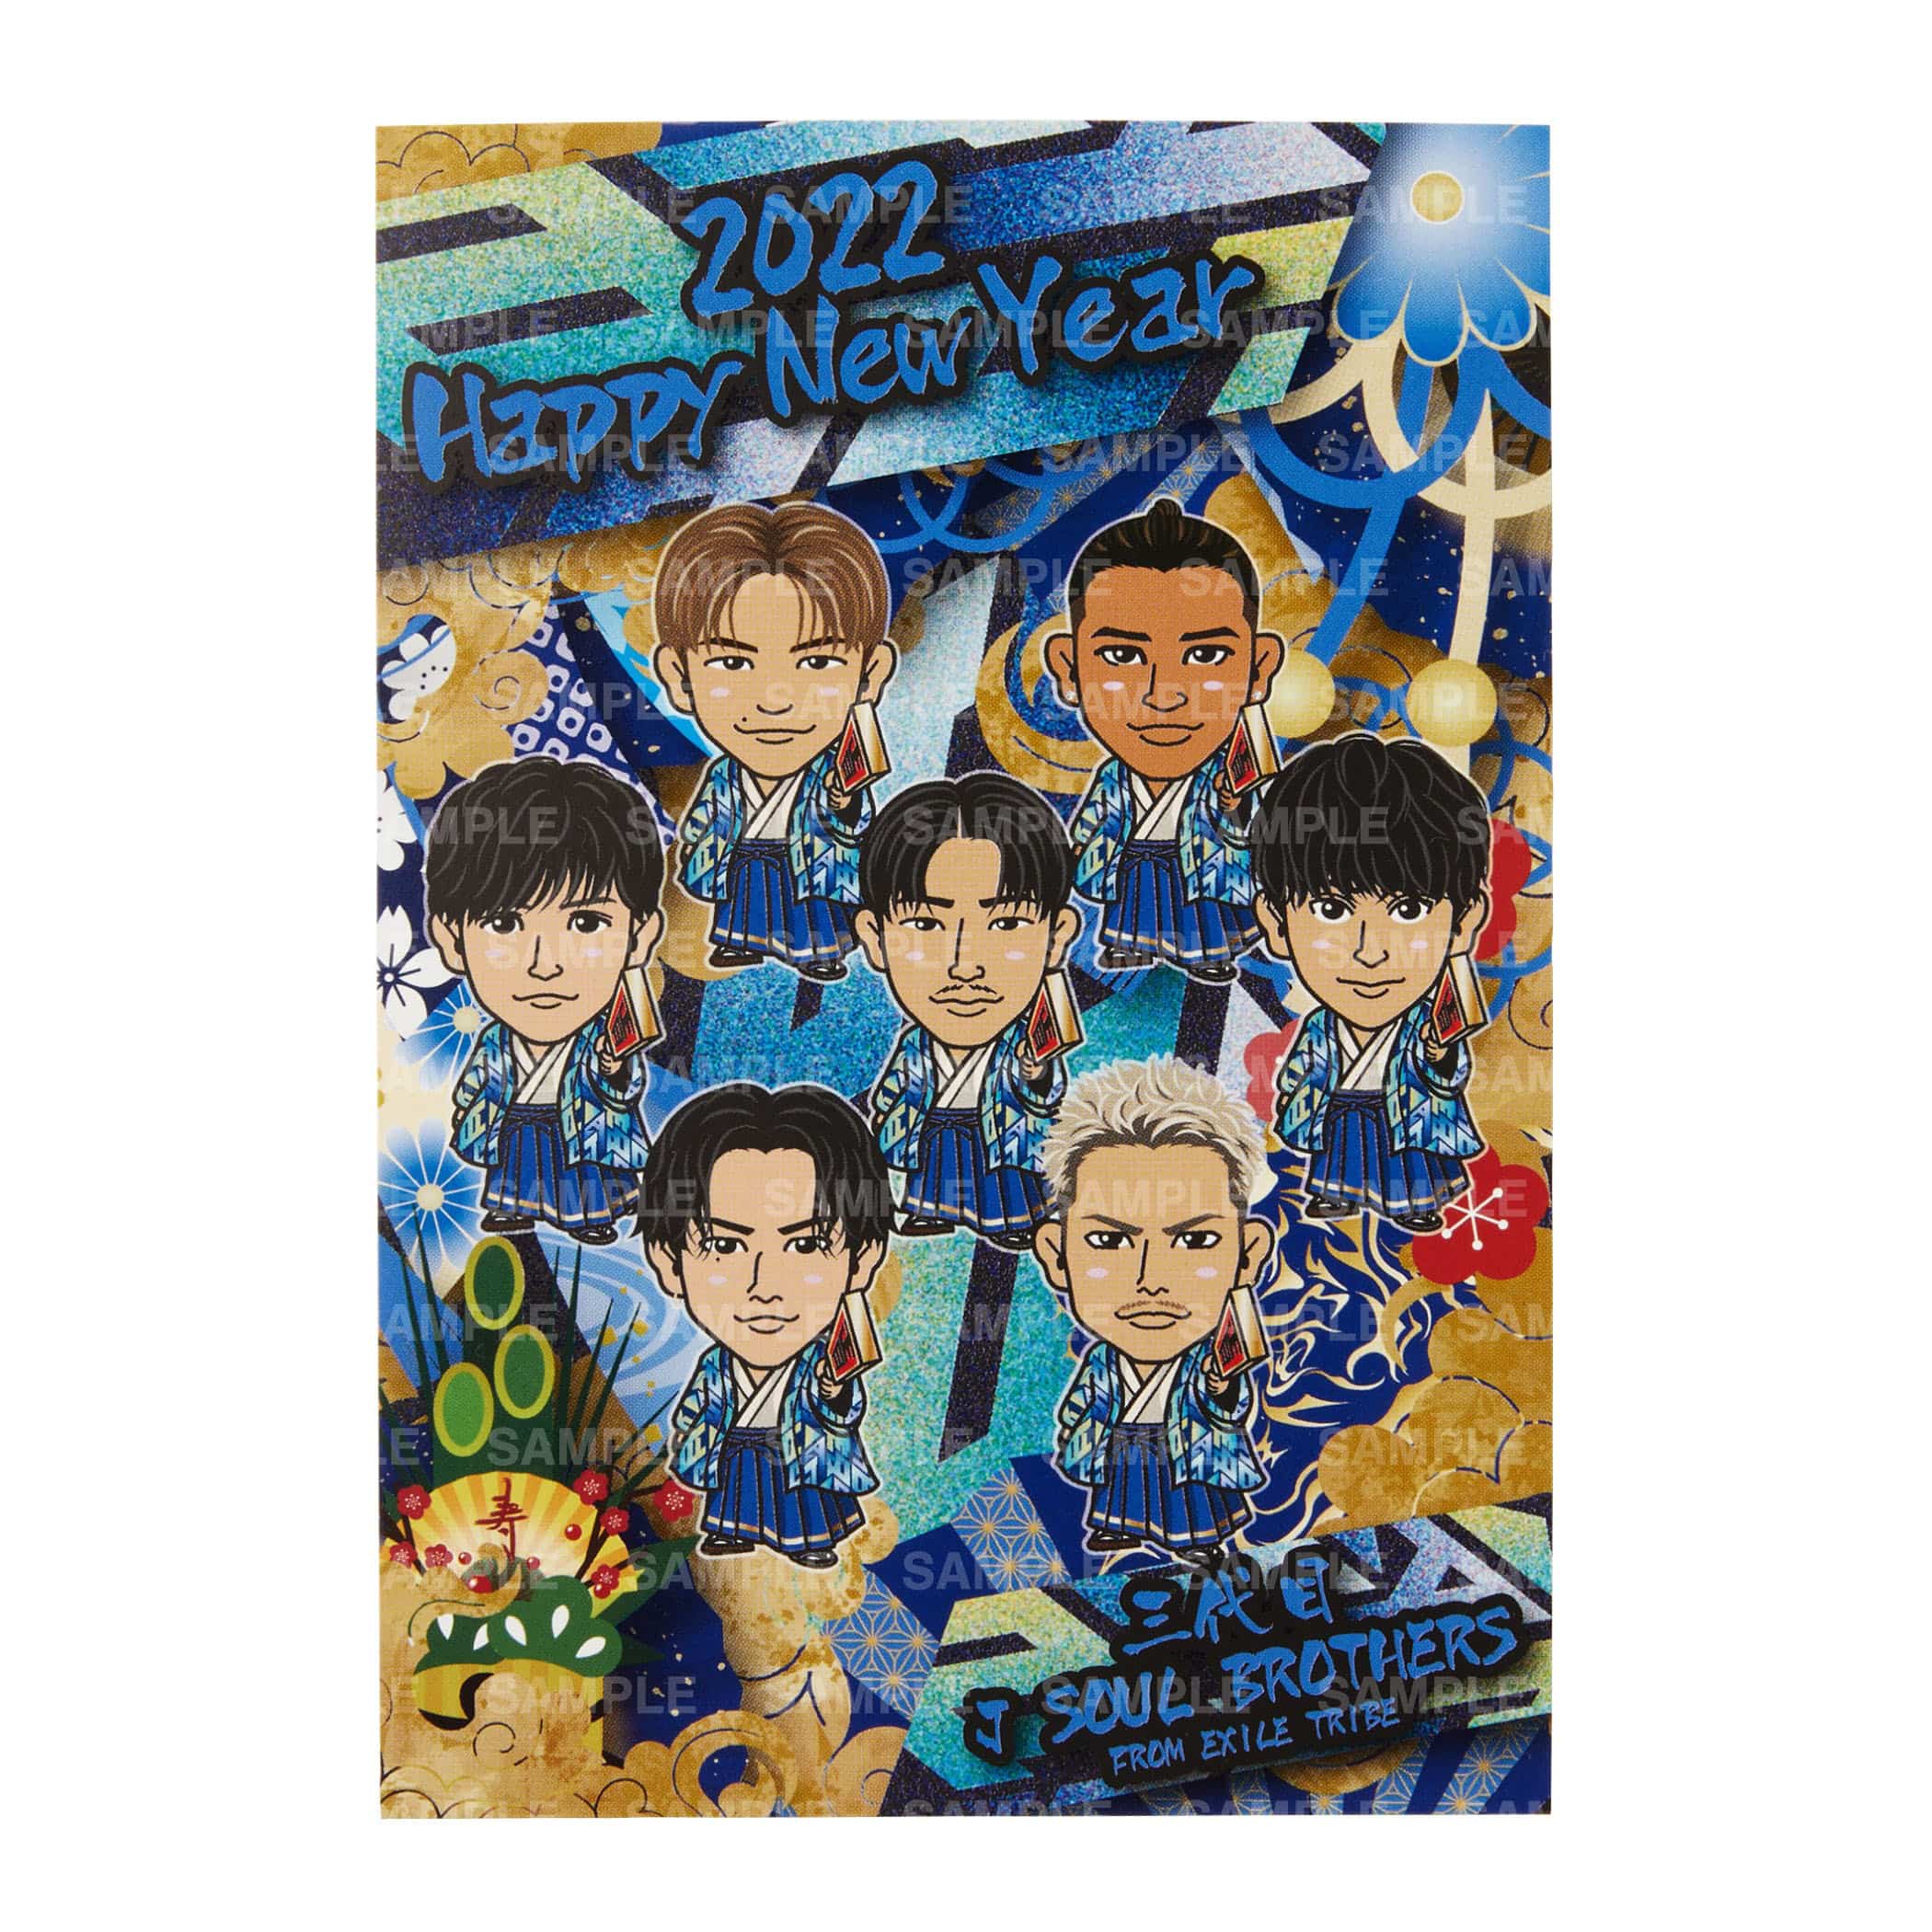 Exile Tribe Station Online Store New Year 22 年賀状3枚セット 三代目 J Soul Brothers